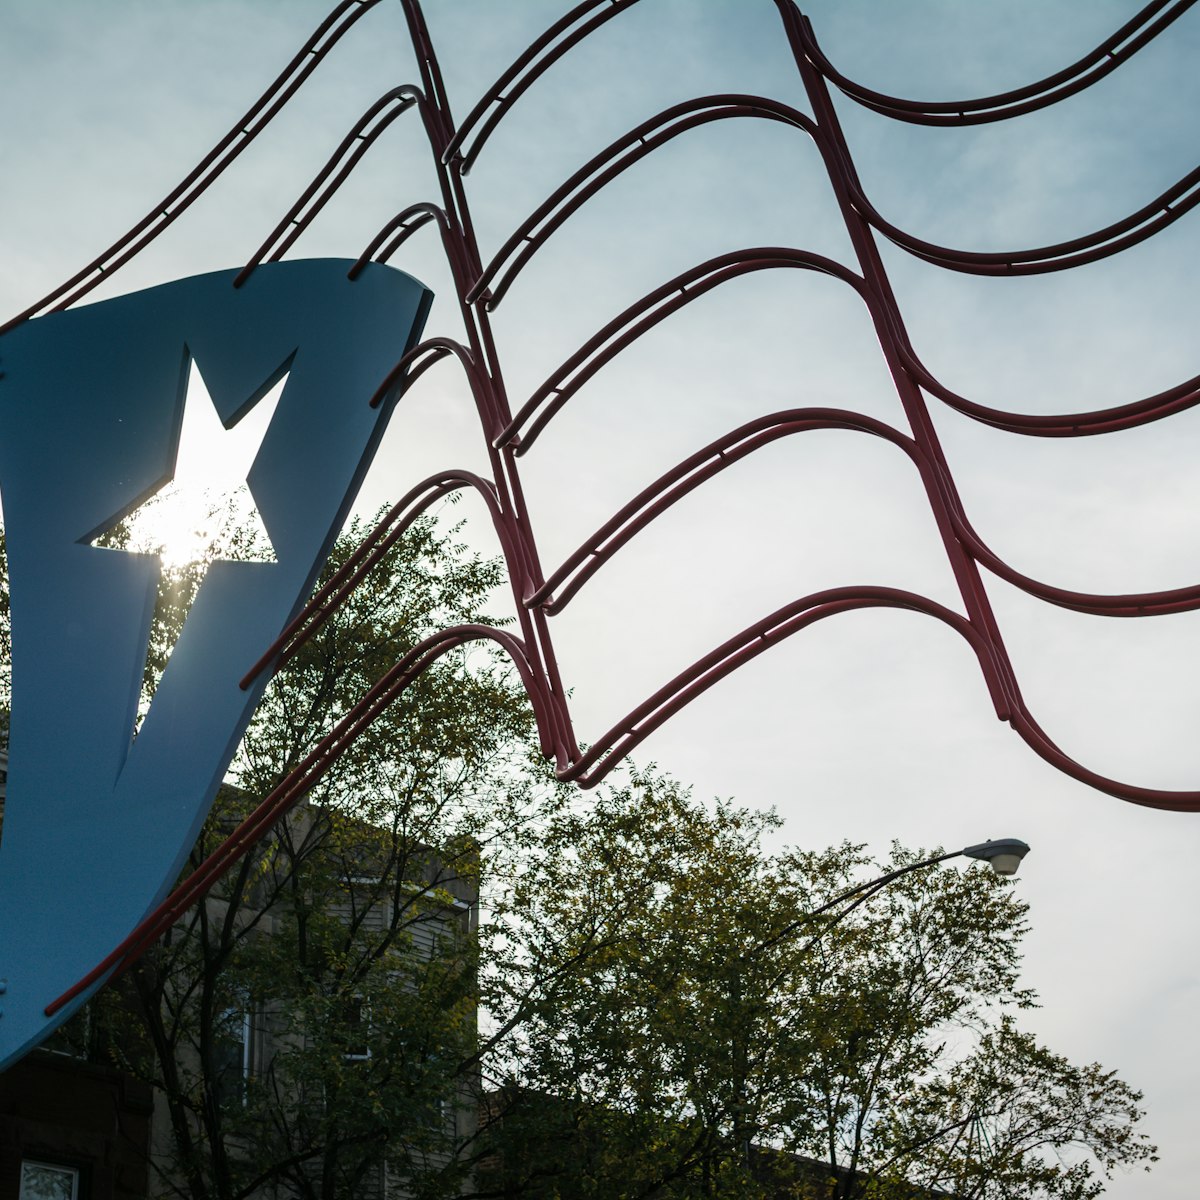 The Puertorican flag is the center of attraction at Paseo Boricua on Division Street in Chicago, Il. The section known as Humboldt Park has a large concentration of Puertorican families living in it.